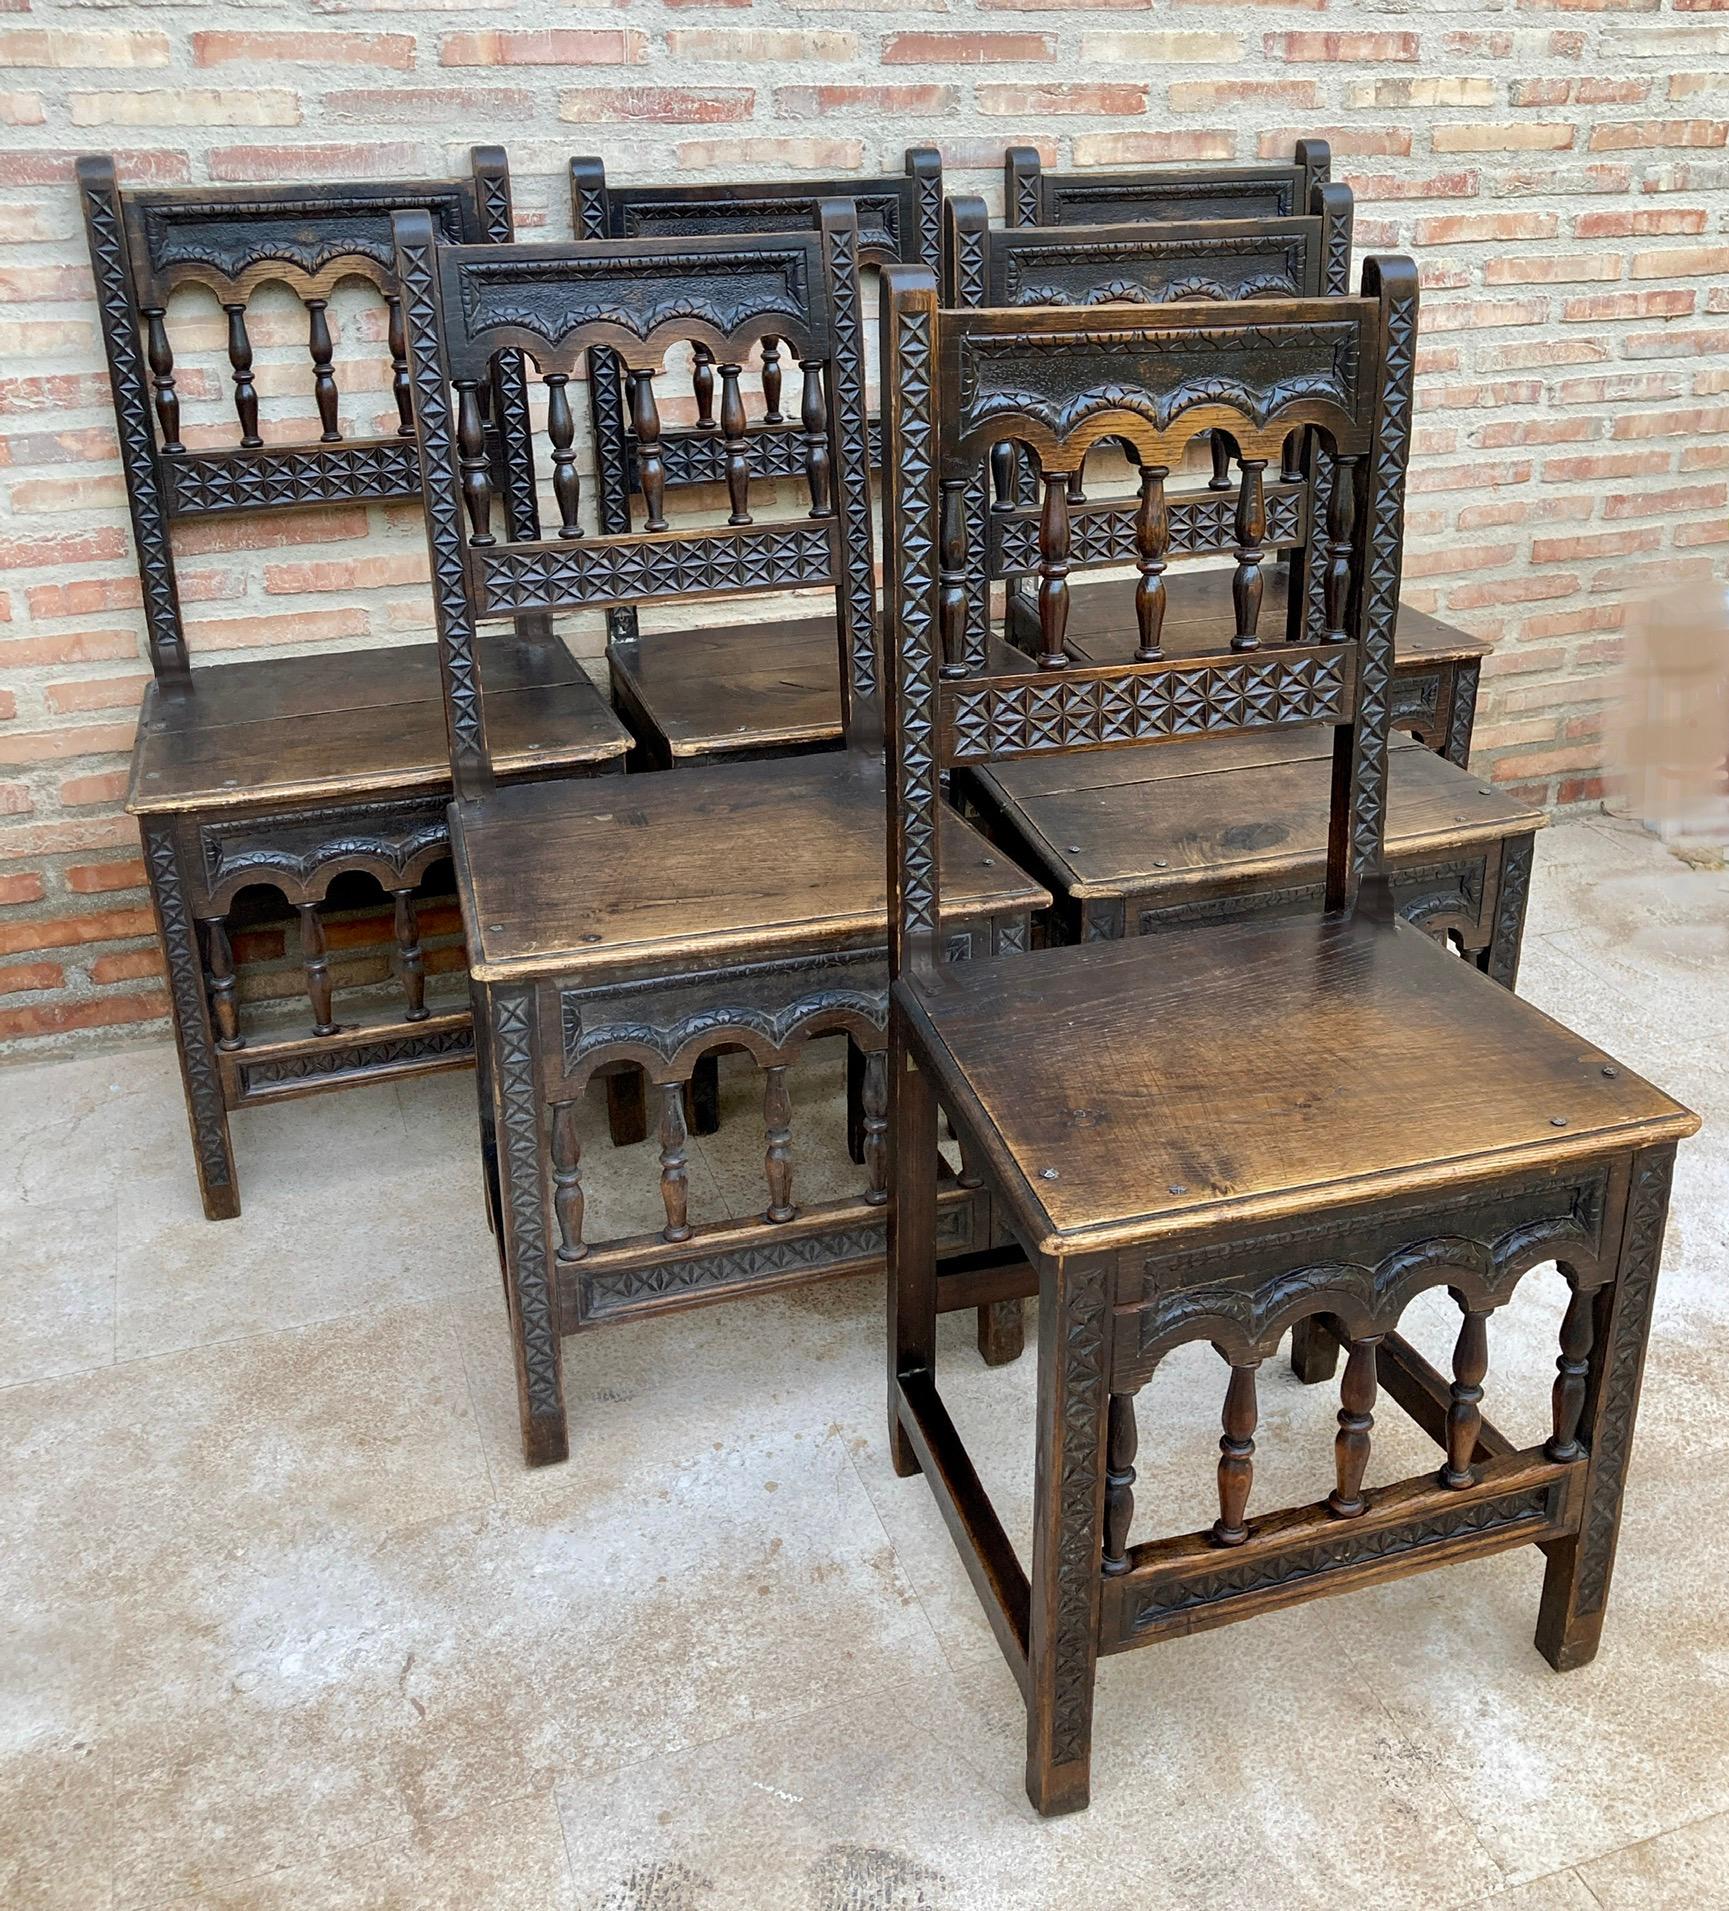 A set of 6 Spanish chairs with oak wood seat on walnut and sycamore frames with hand carved decoration. These chairs are true to the Spanish character and each features carvings that employ typical Spanish elements.

Design Period 1920 to 1949